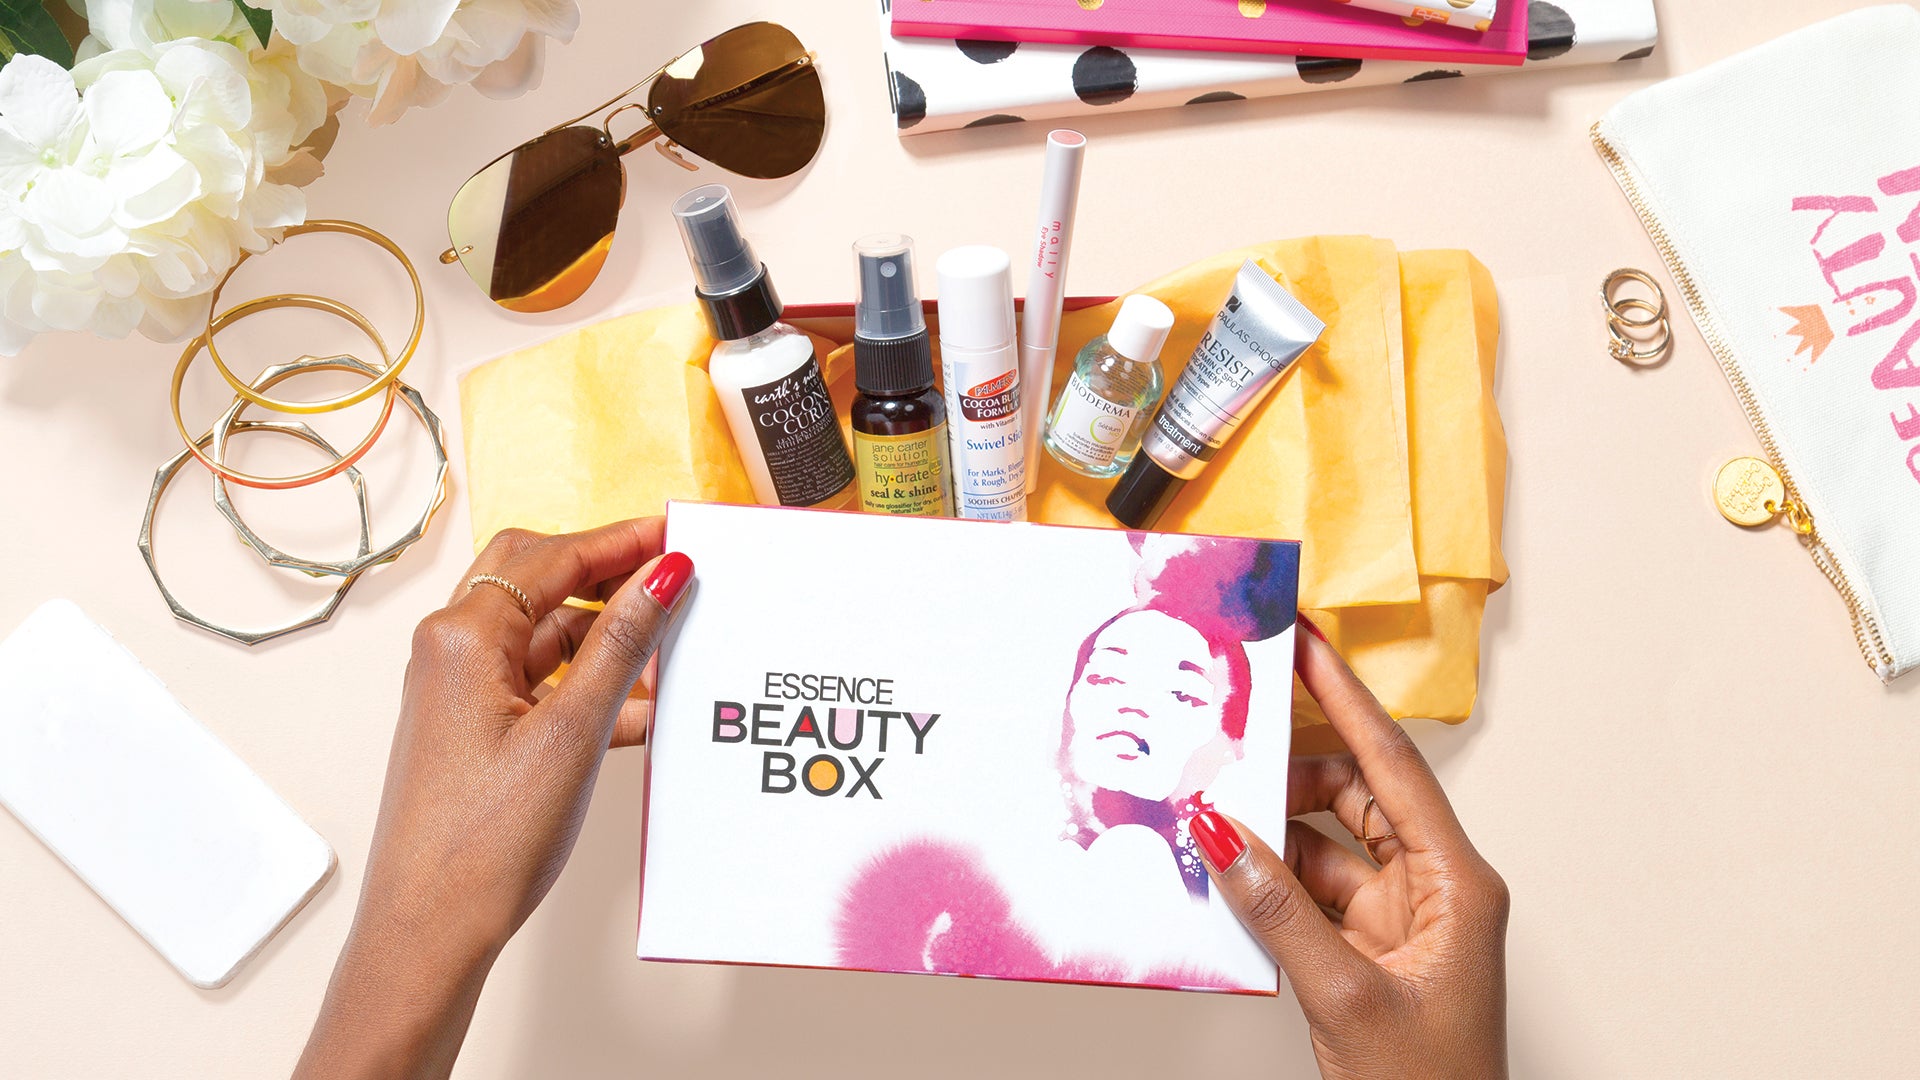 VIDEO: How to Make A Fresh Start With Our April BeautyBox Essentials